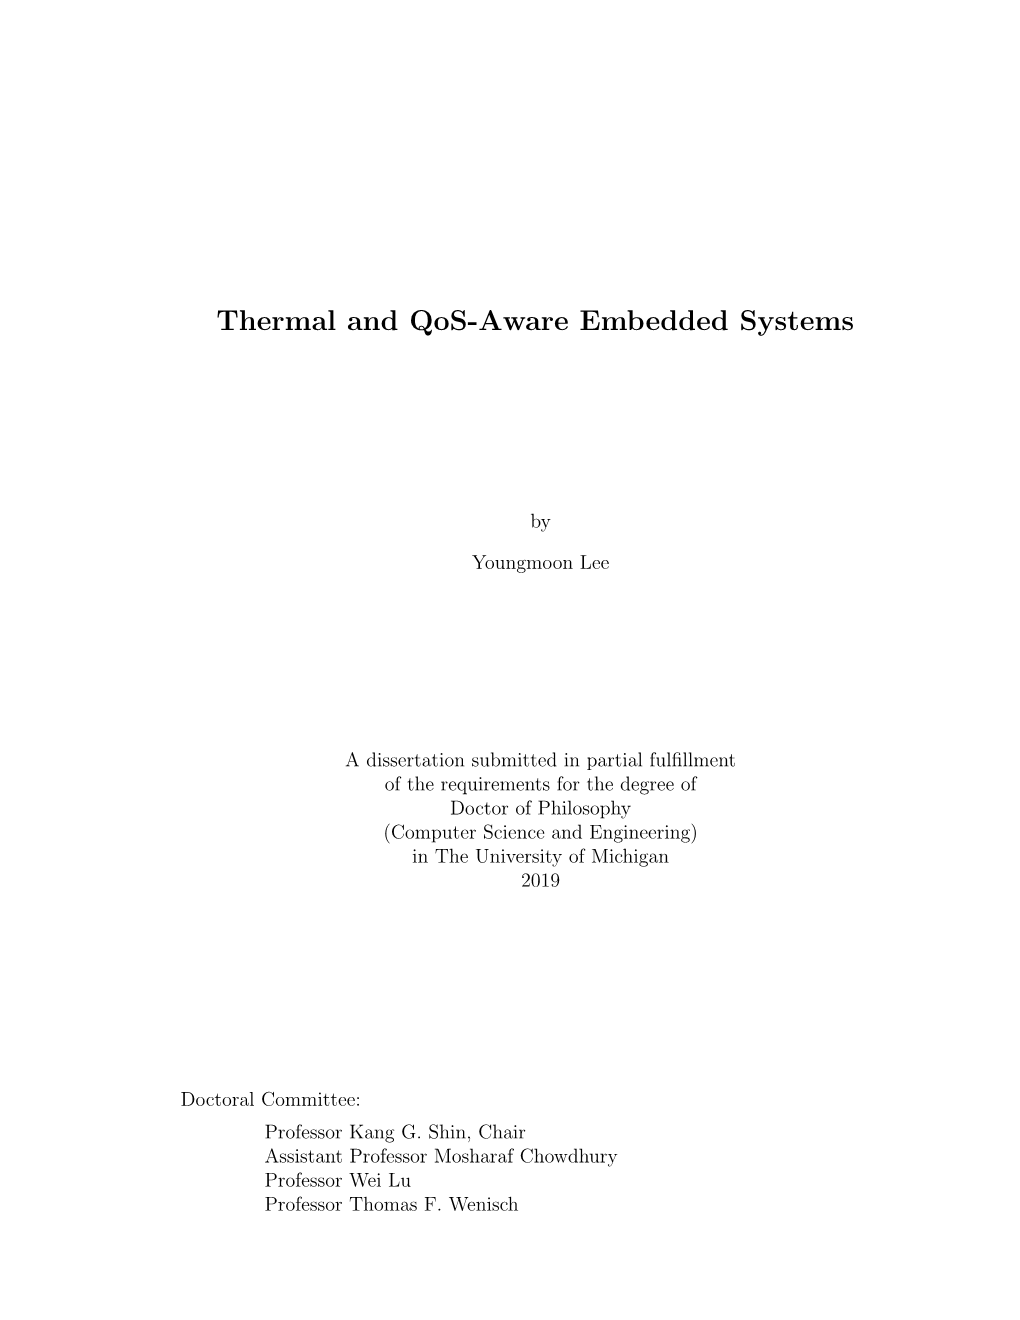 Thermal and Qos-Aware Embedded Systems